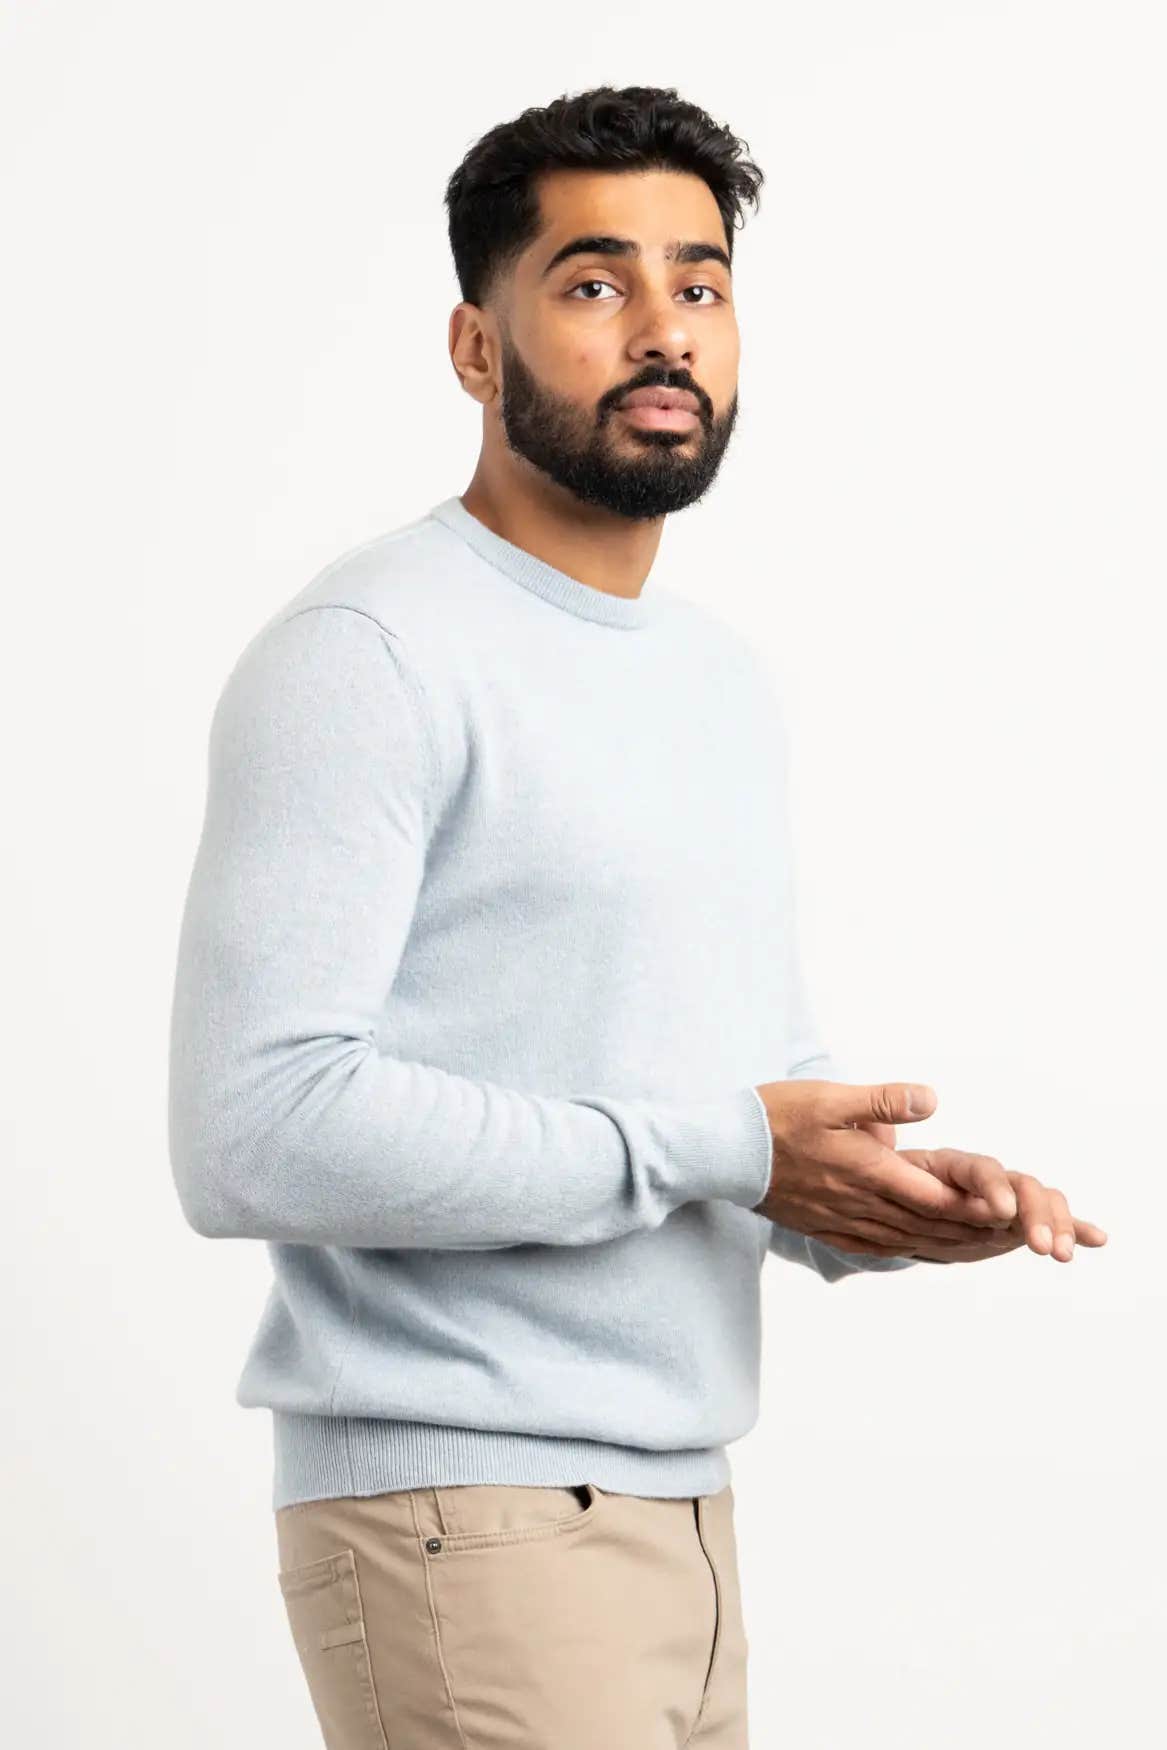 Light Blue Oasi Cashmere Crewneck sweater worn by an Indian man against a white background